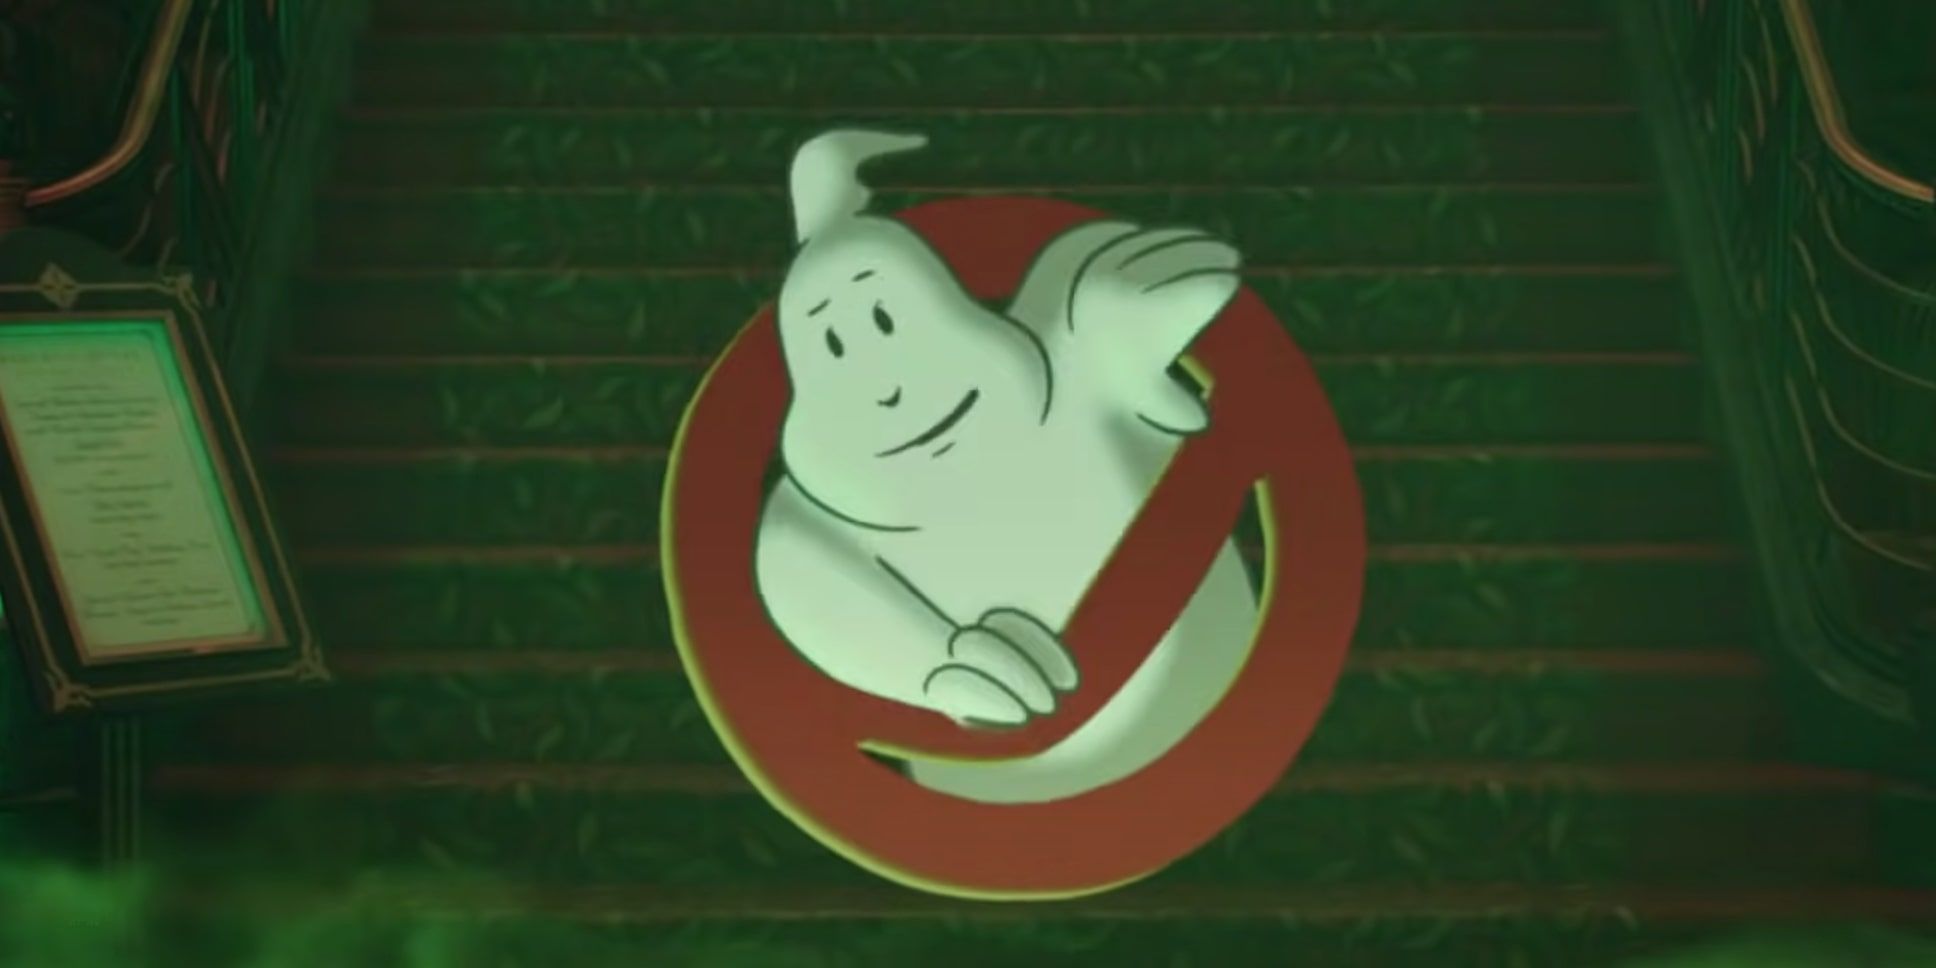 10 Ways The Ghostbusters 2016 Reboot Is Underrated